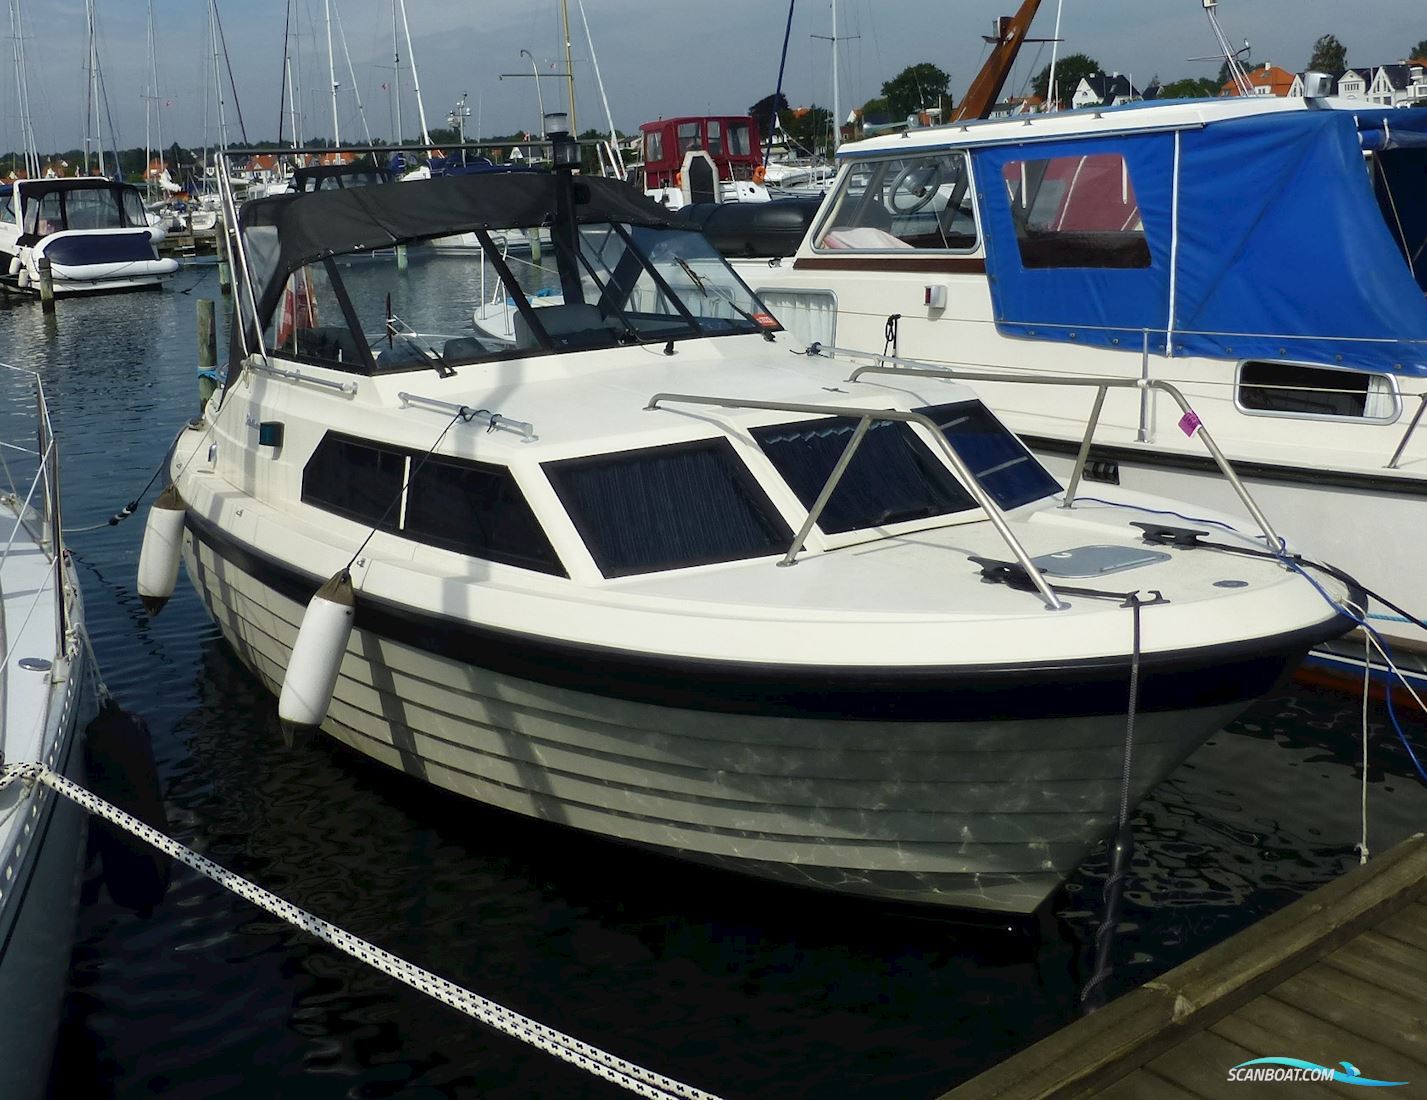 Scand 25 Classic Motor boat 1987, with Yanmar engine, Denmark